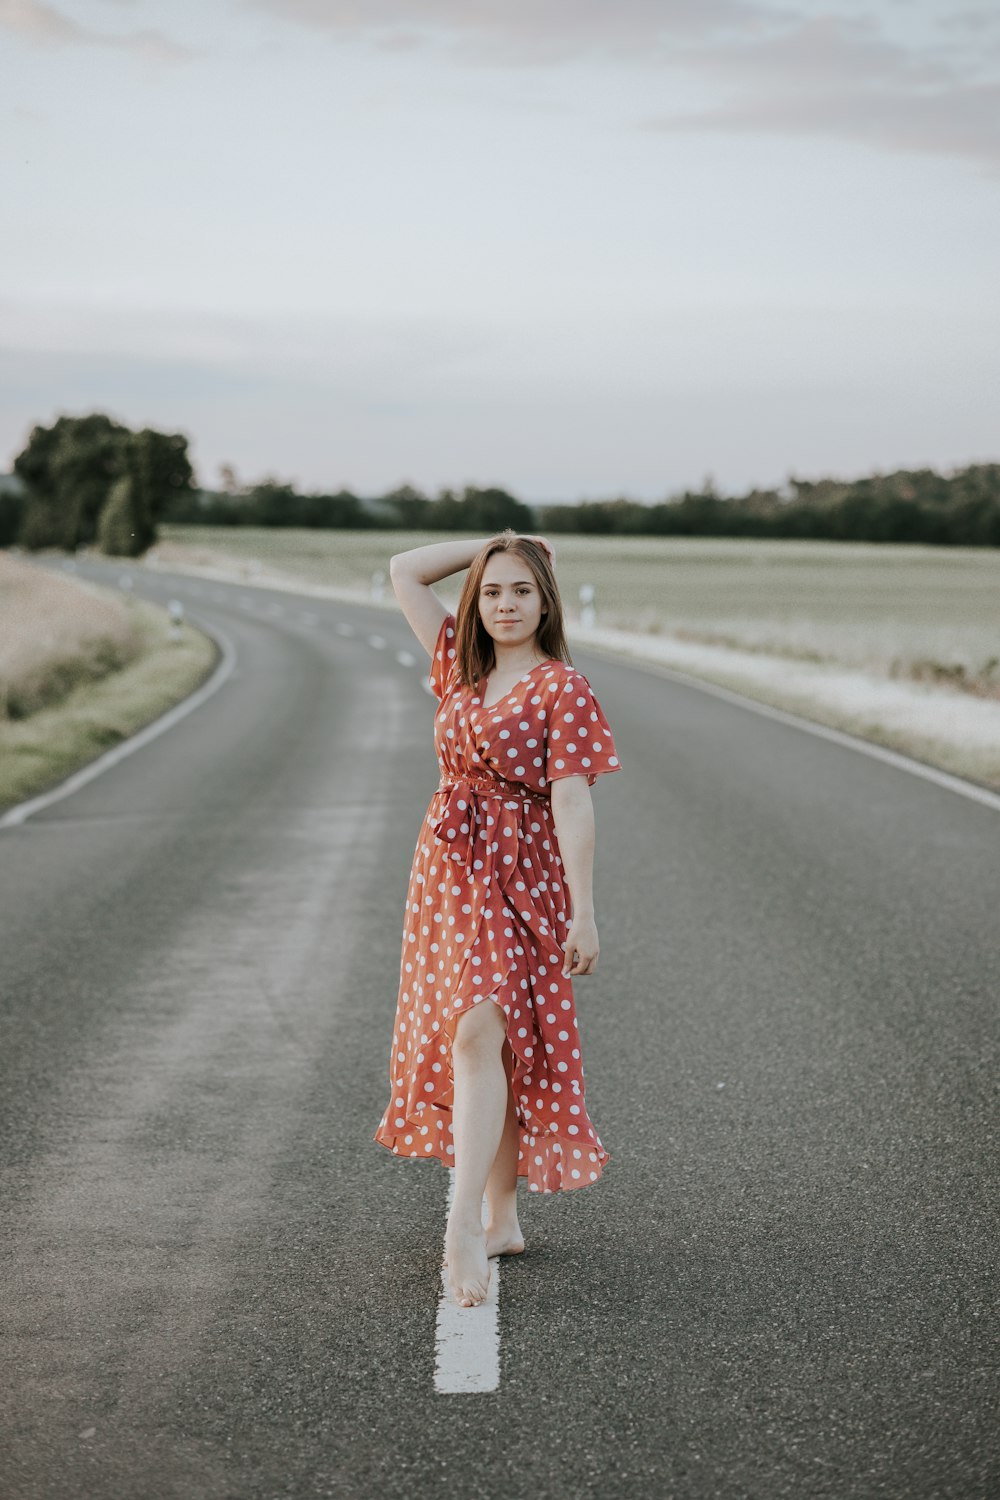 a person in a dress walking on a road